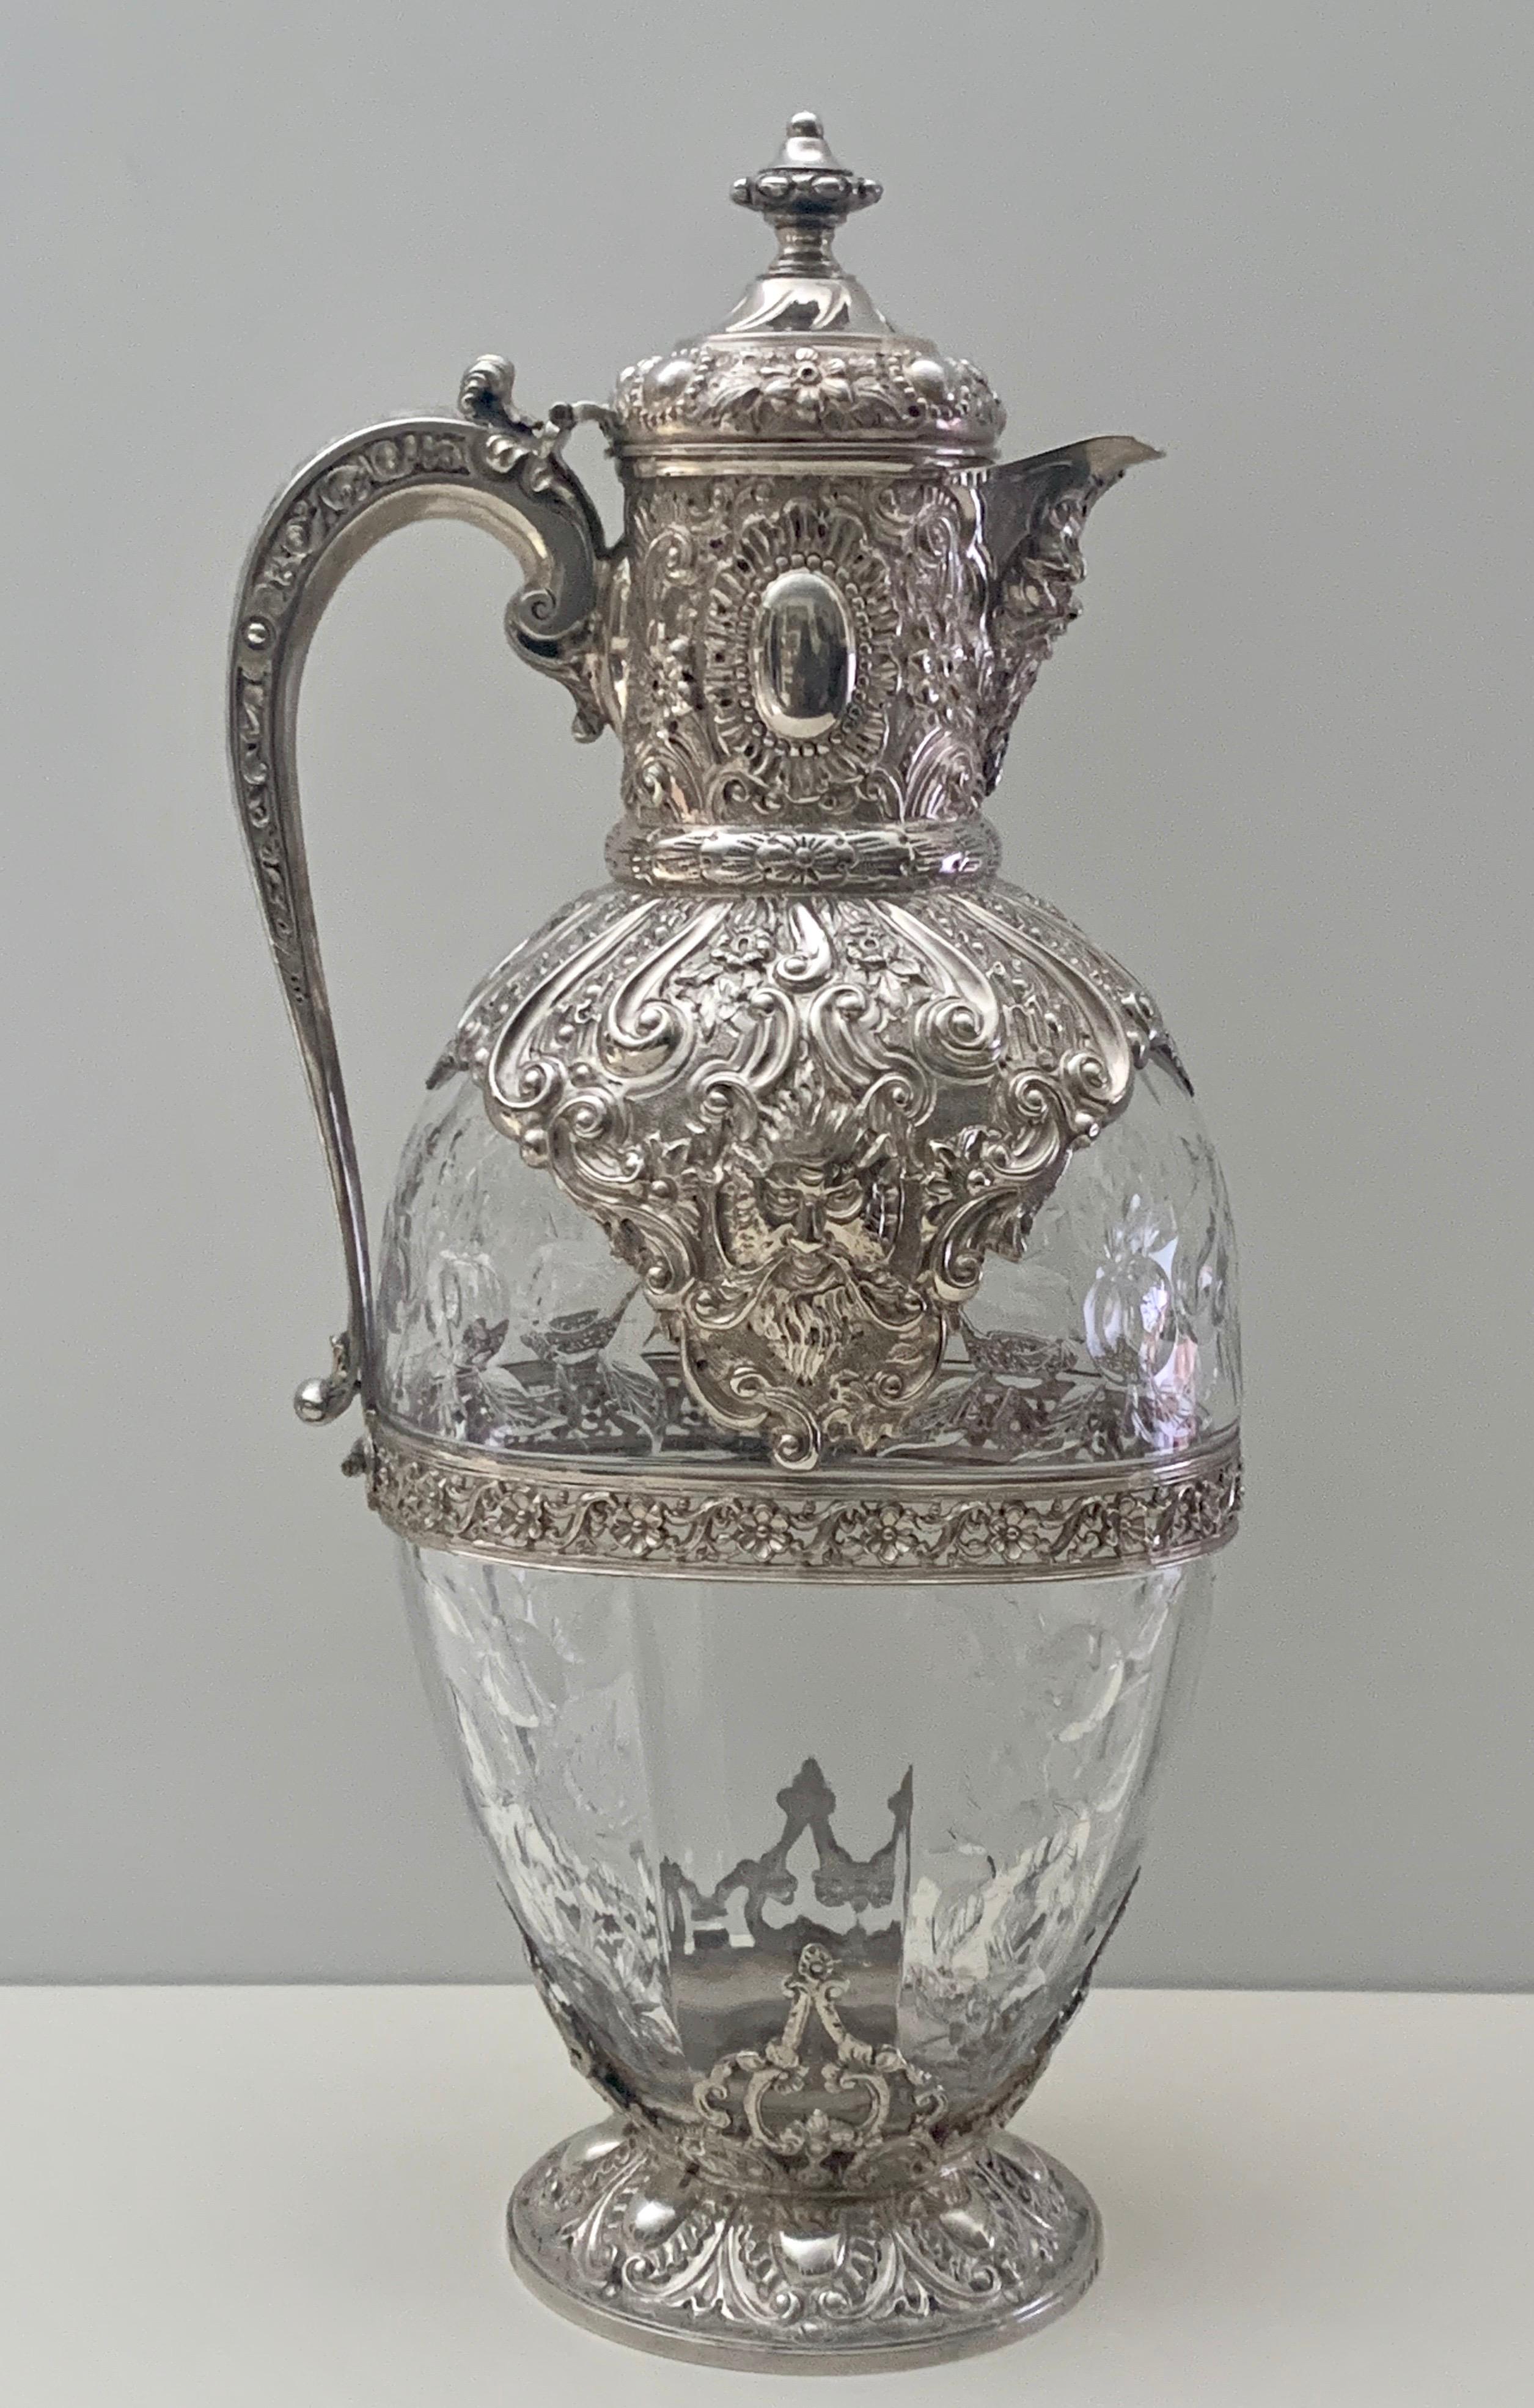 A stunning Victorian silver and 'Rock Crystal' glass claret jug
by Charles Edwards, fully hallmarked for London 1892, this superb quality carved glass claret jug with silver mounts to top and foot. the mounts embossed with scrolls, flowers,